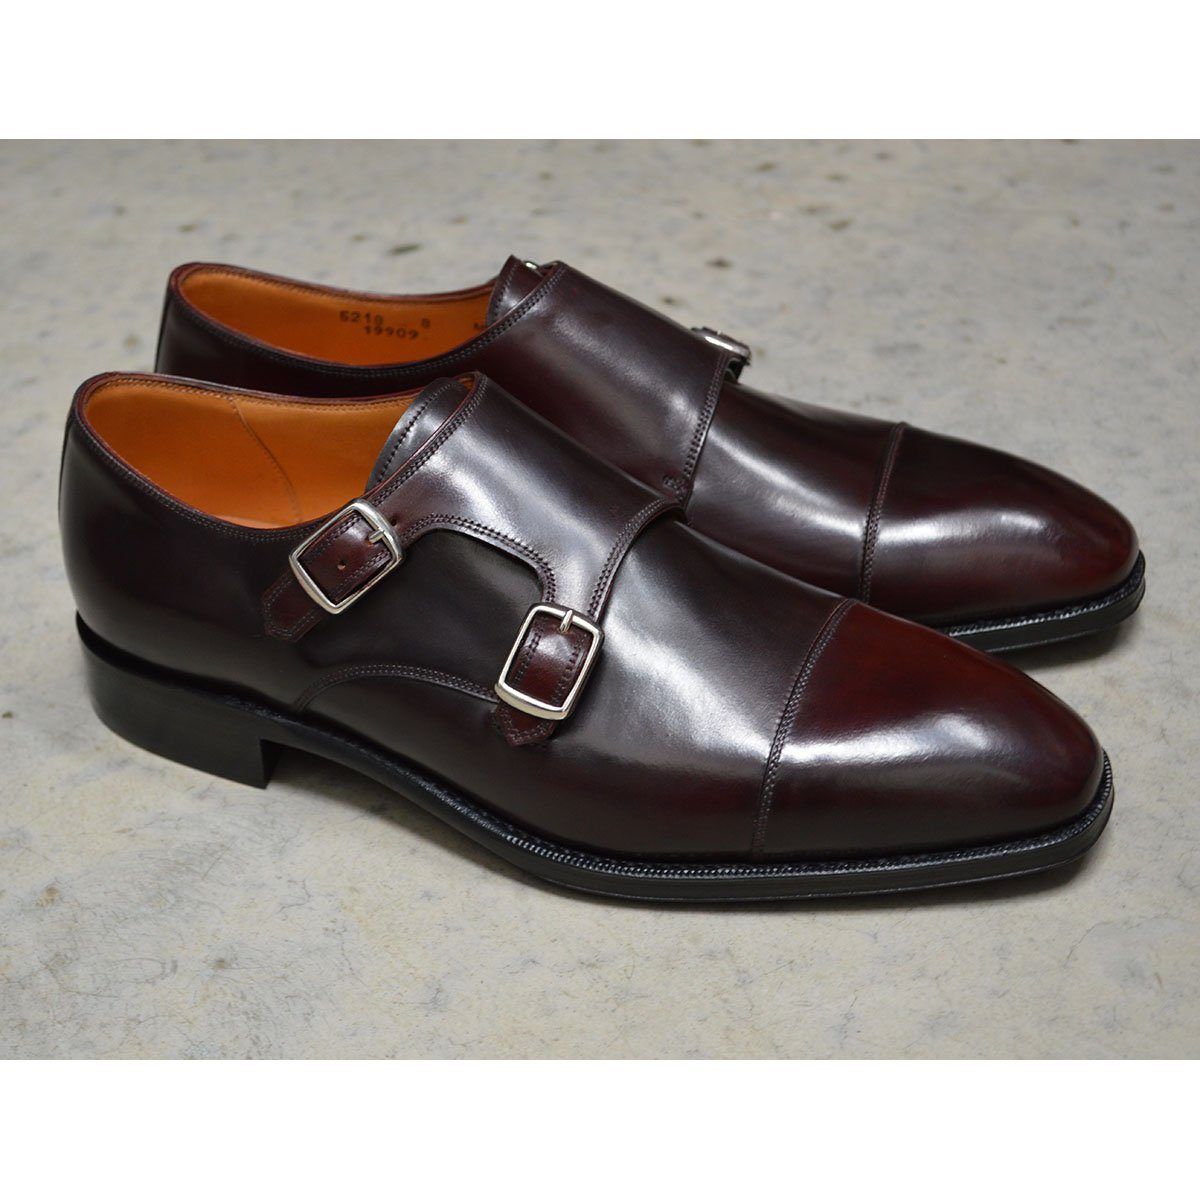 Berwick 1707 Cordovan Collection – A Fine Pair of Shoes